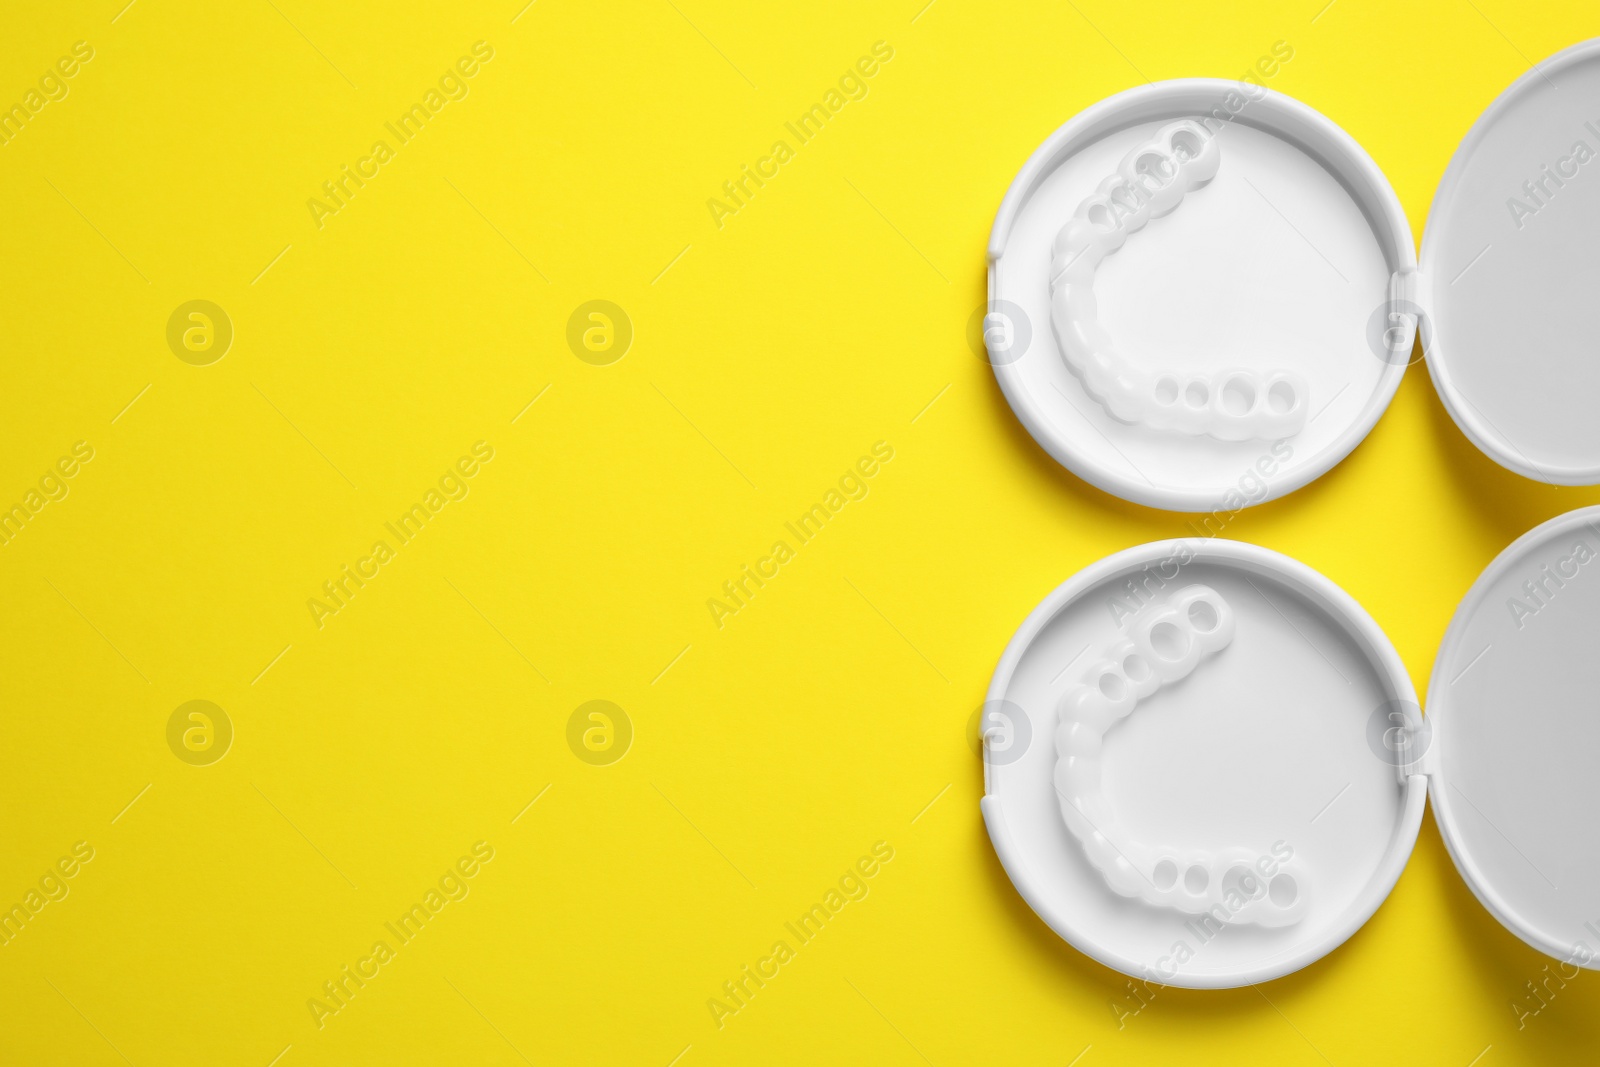 Photo of Dental mouth guards in containers on yellow background, flat lay with space for text. Bite correction